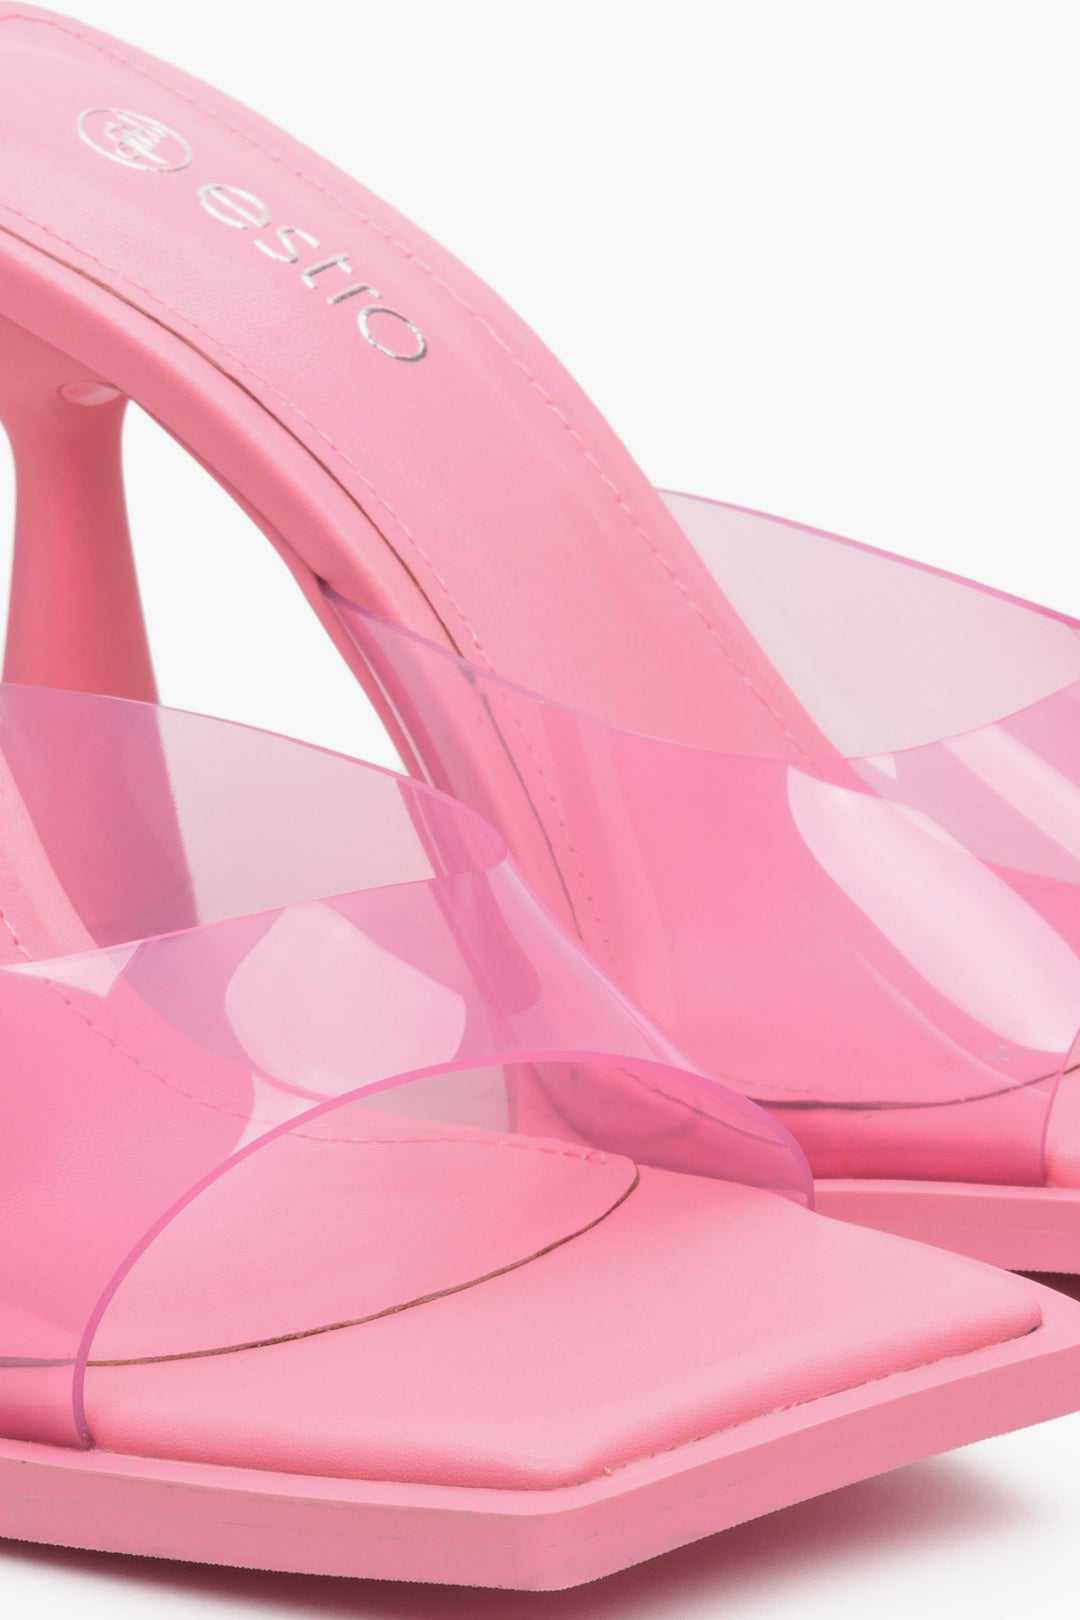 Estro women's sandals with a pink sole - close-up on the details.